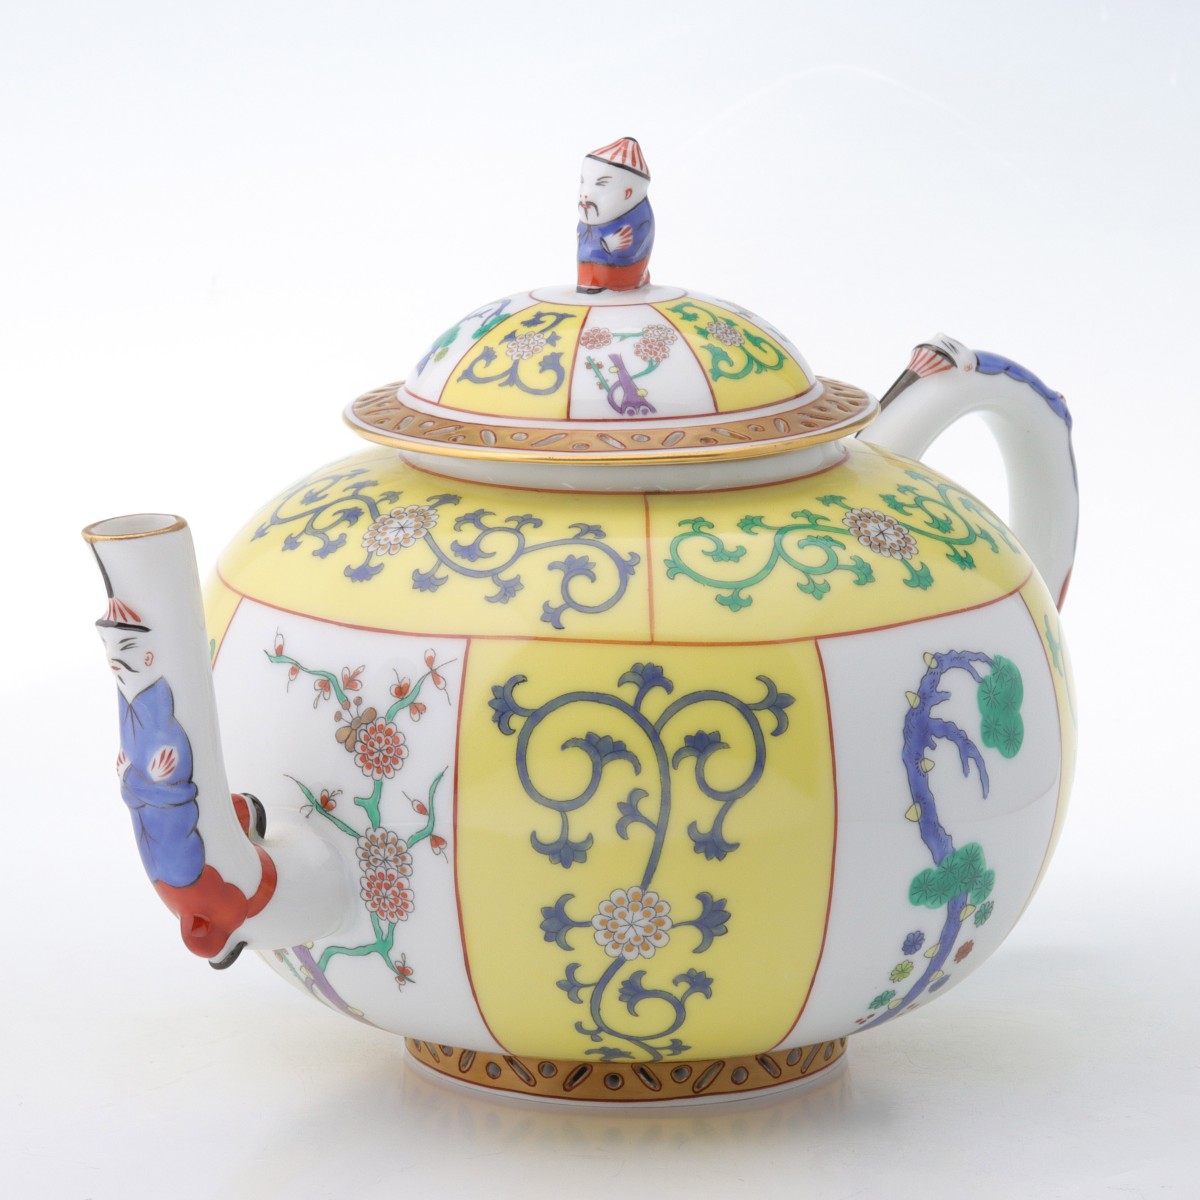 A HEREND YELLOW DYNASTY TEAPOT WITH MANDARIN FIGURES